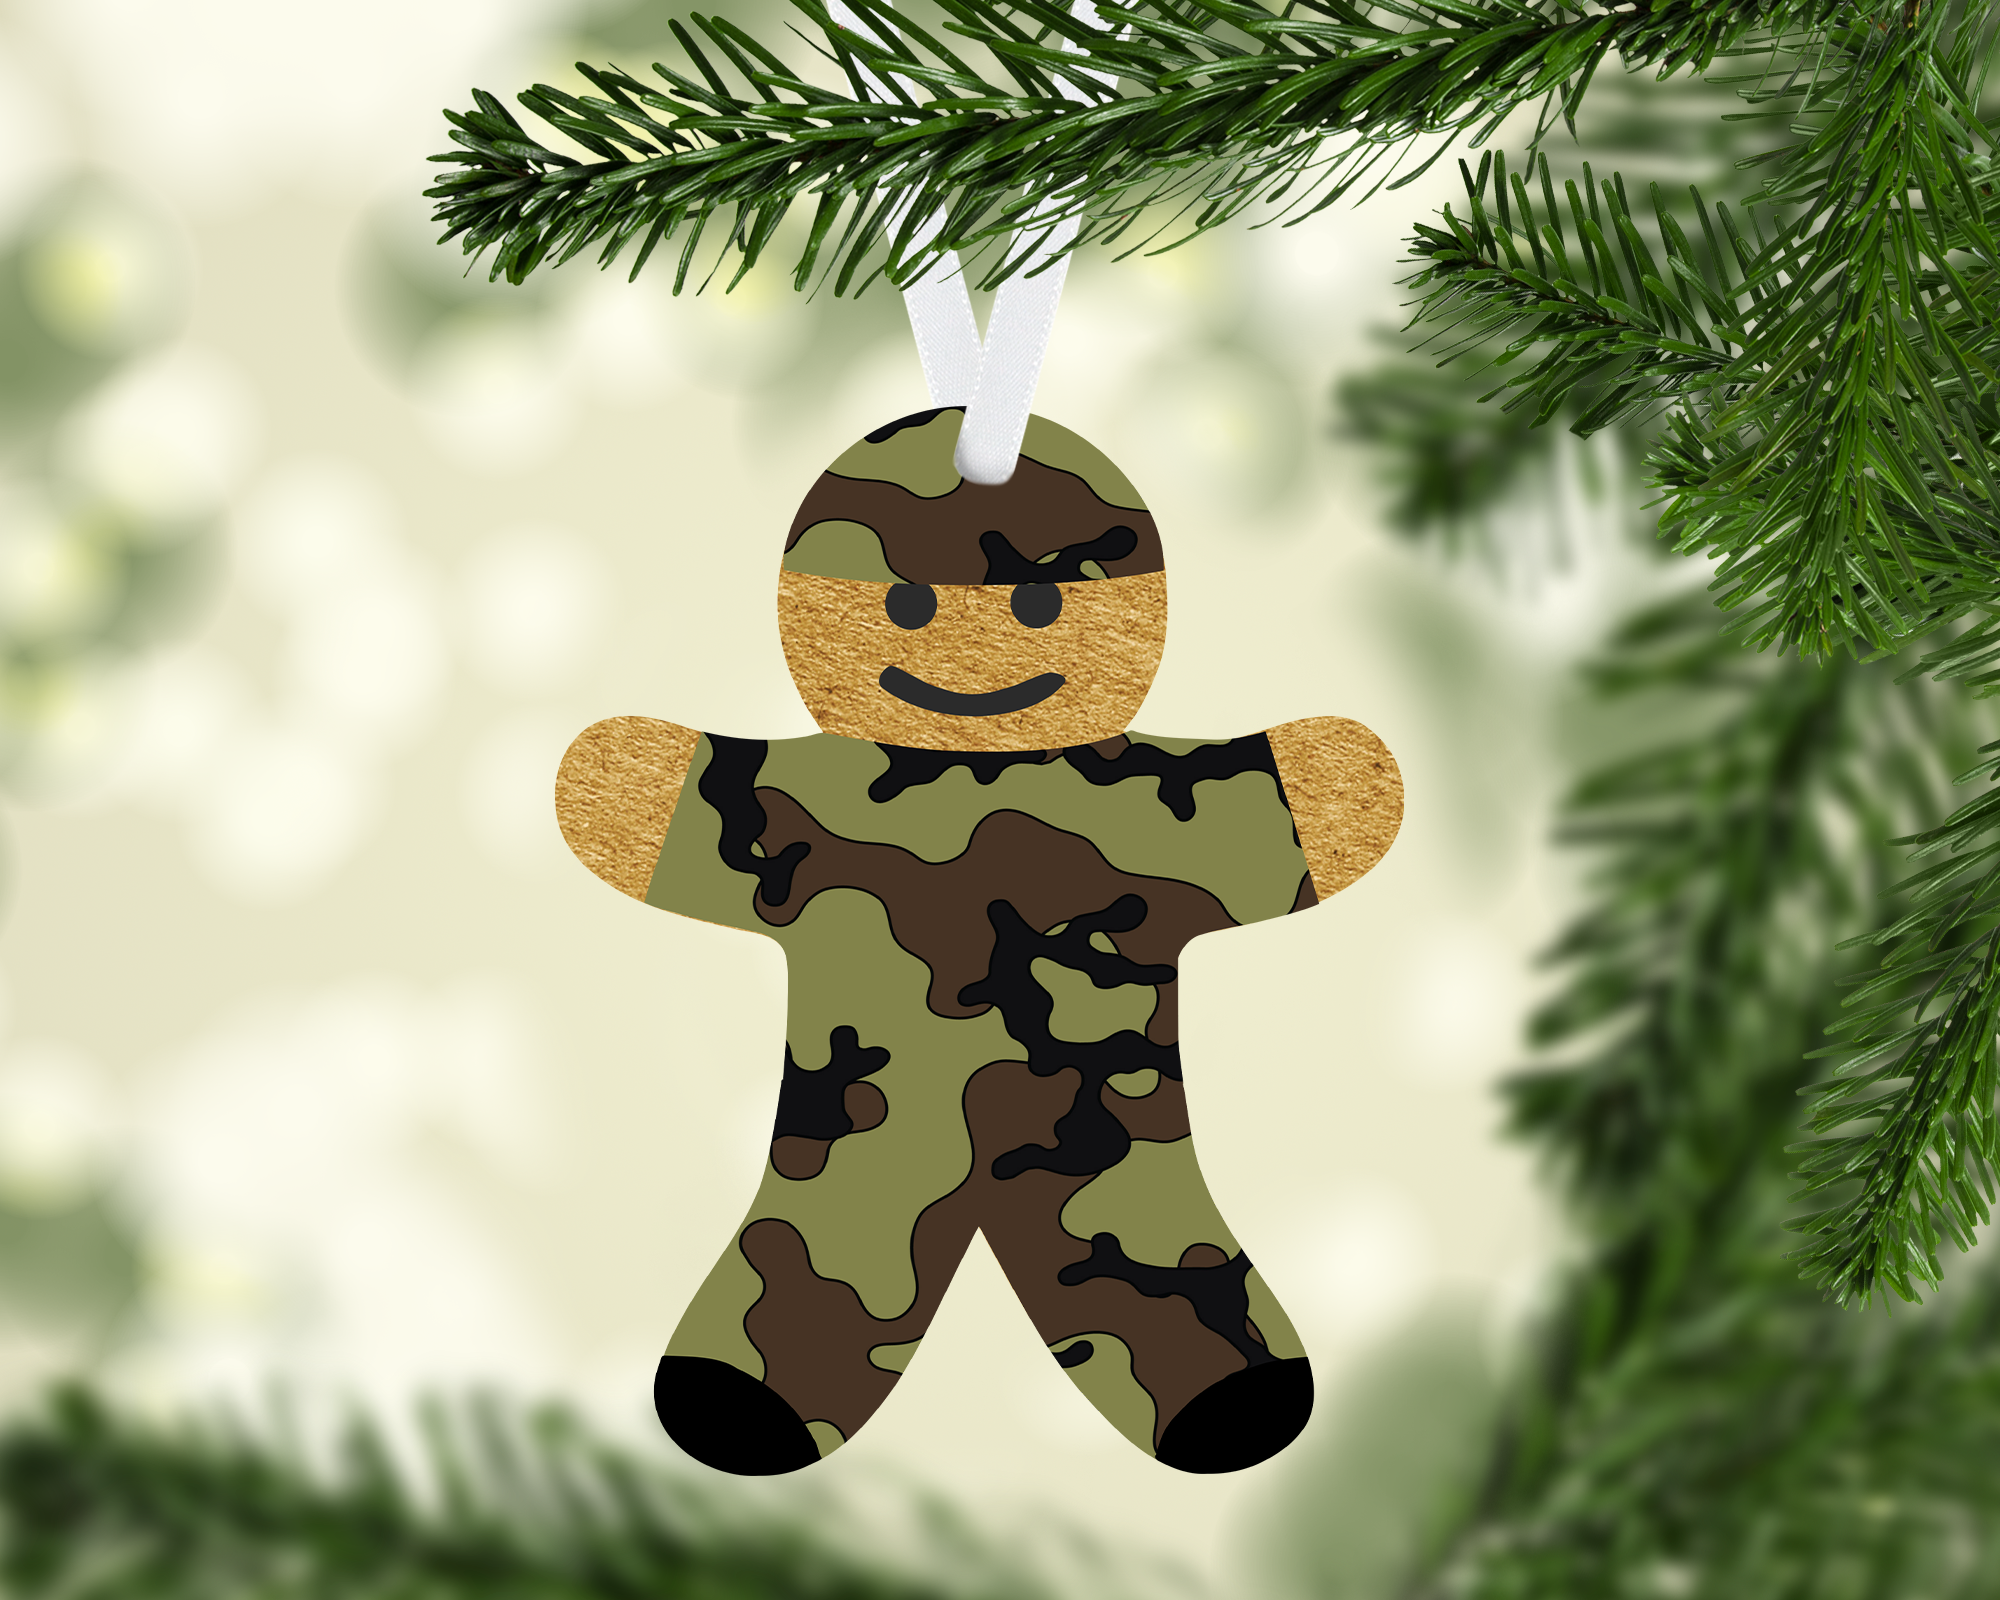 (Instant Print) Digital Download - Gingerbread man army design - made for our blanks